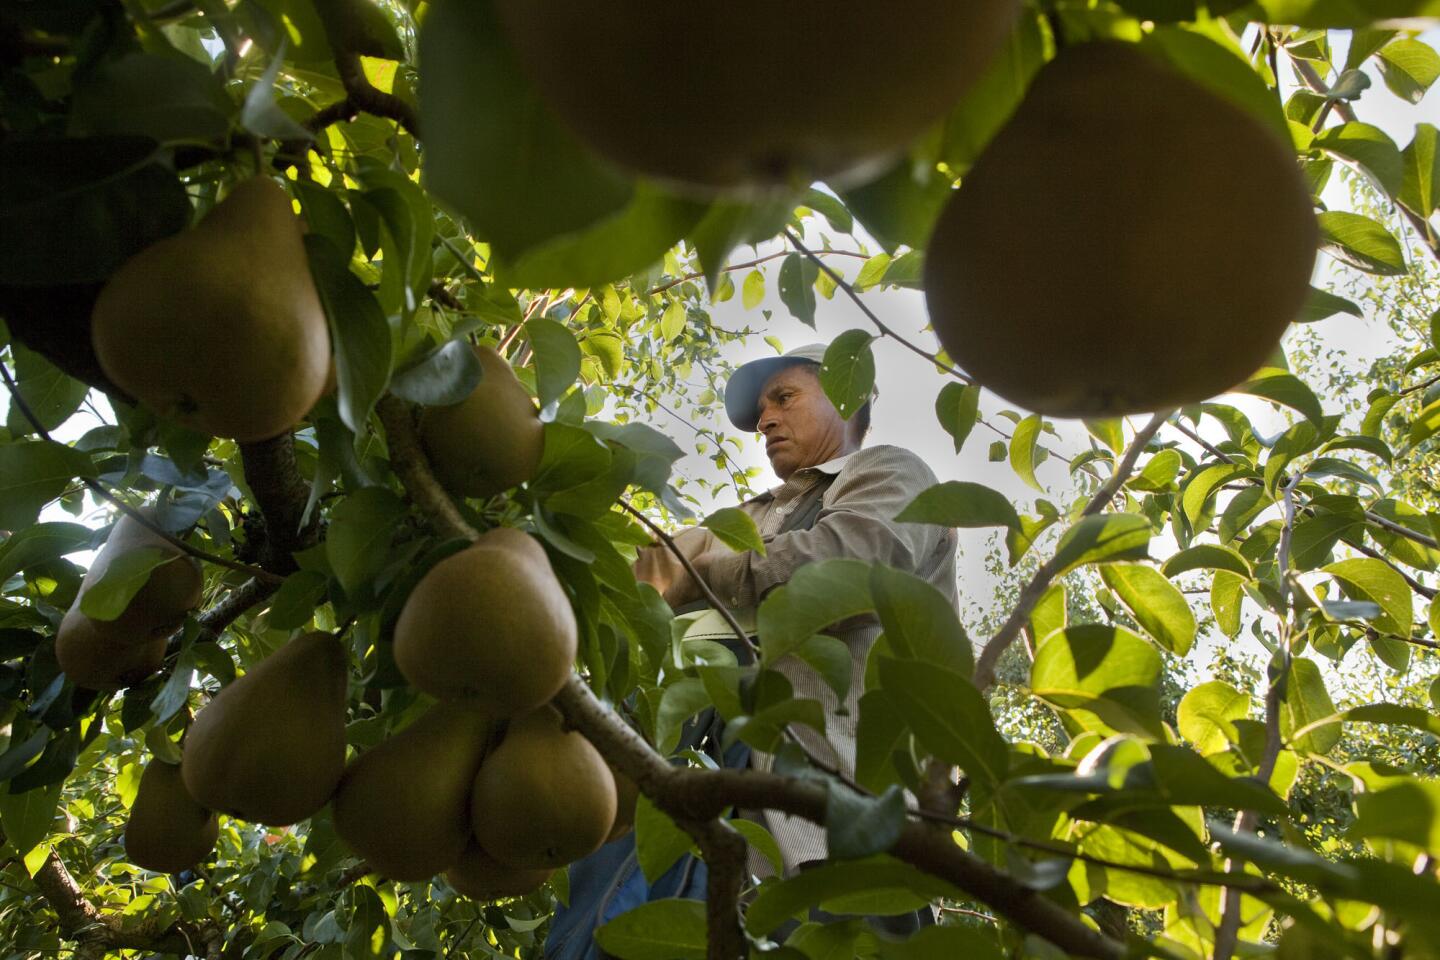 Balancing on a ladder, a picker works the tops of pear trees early in the morning on a Grand Island orchard.